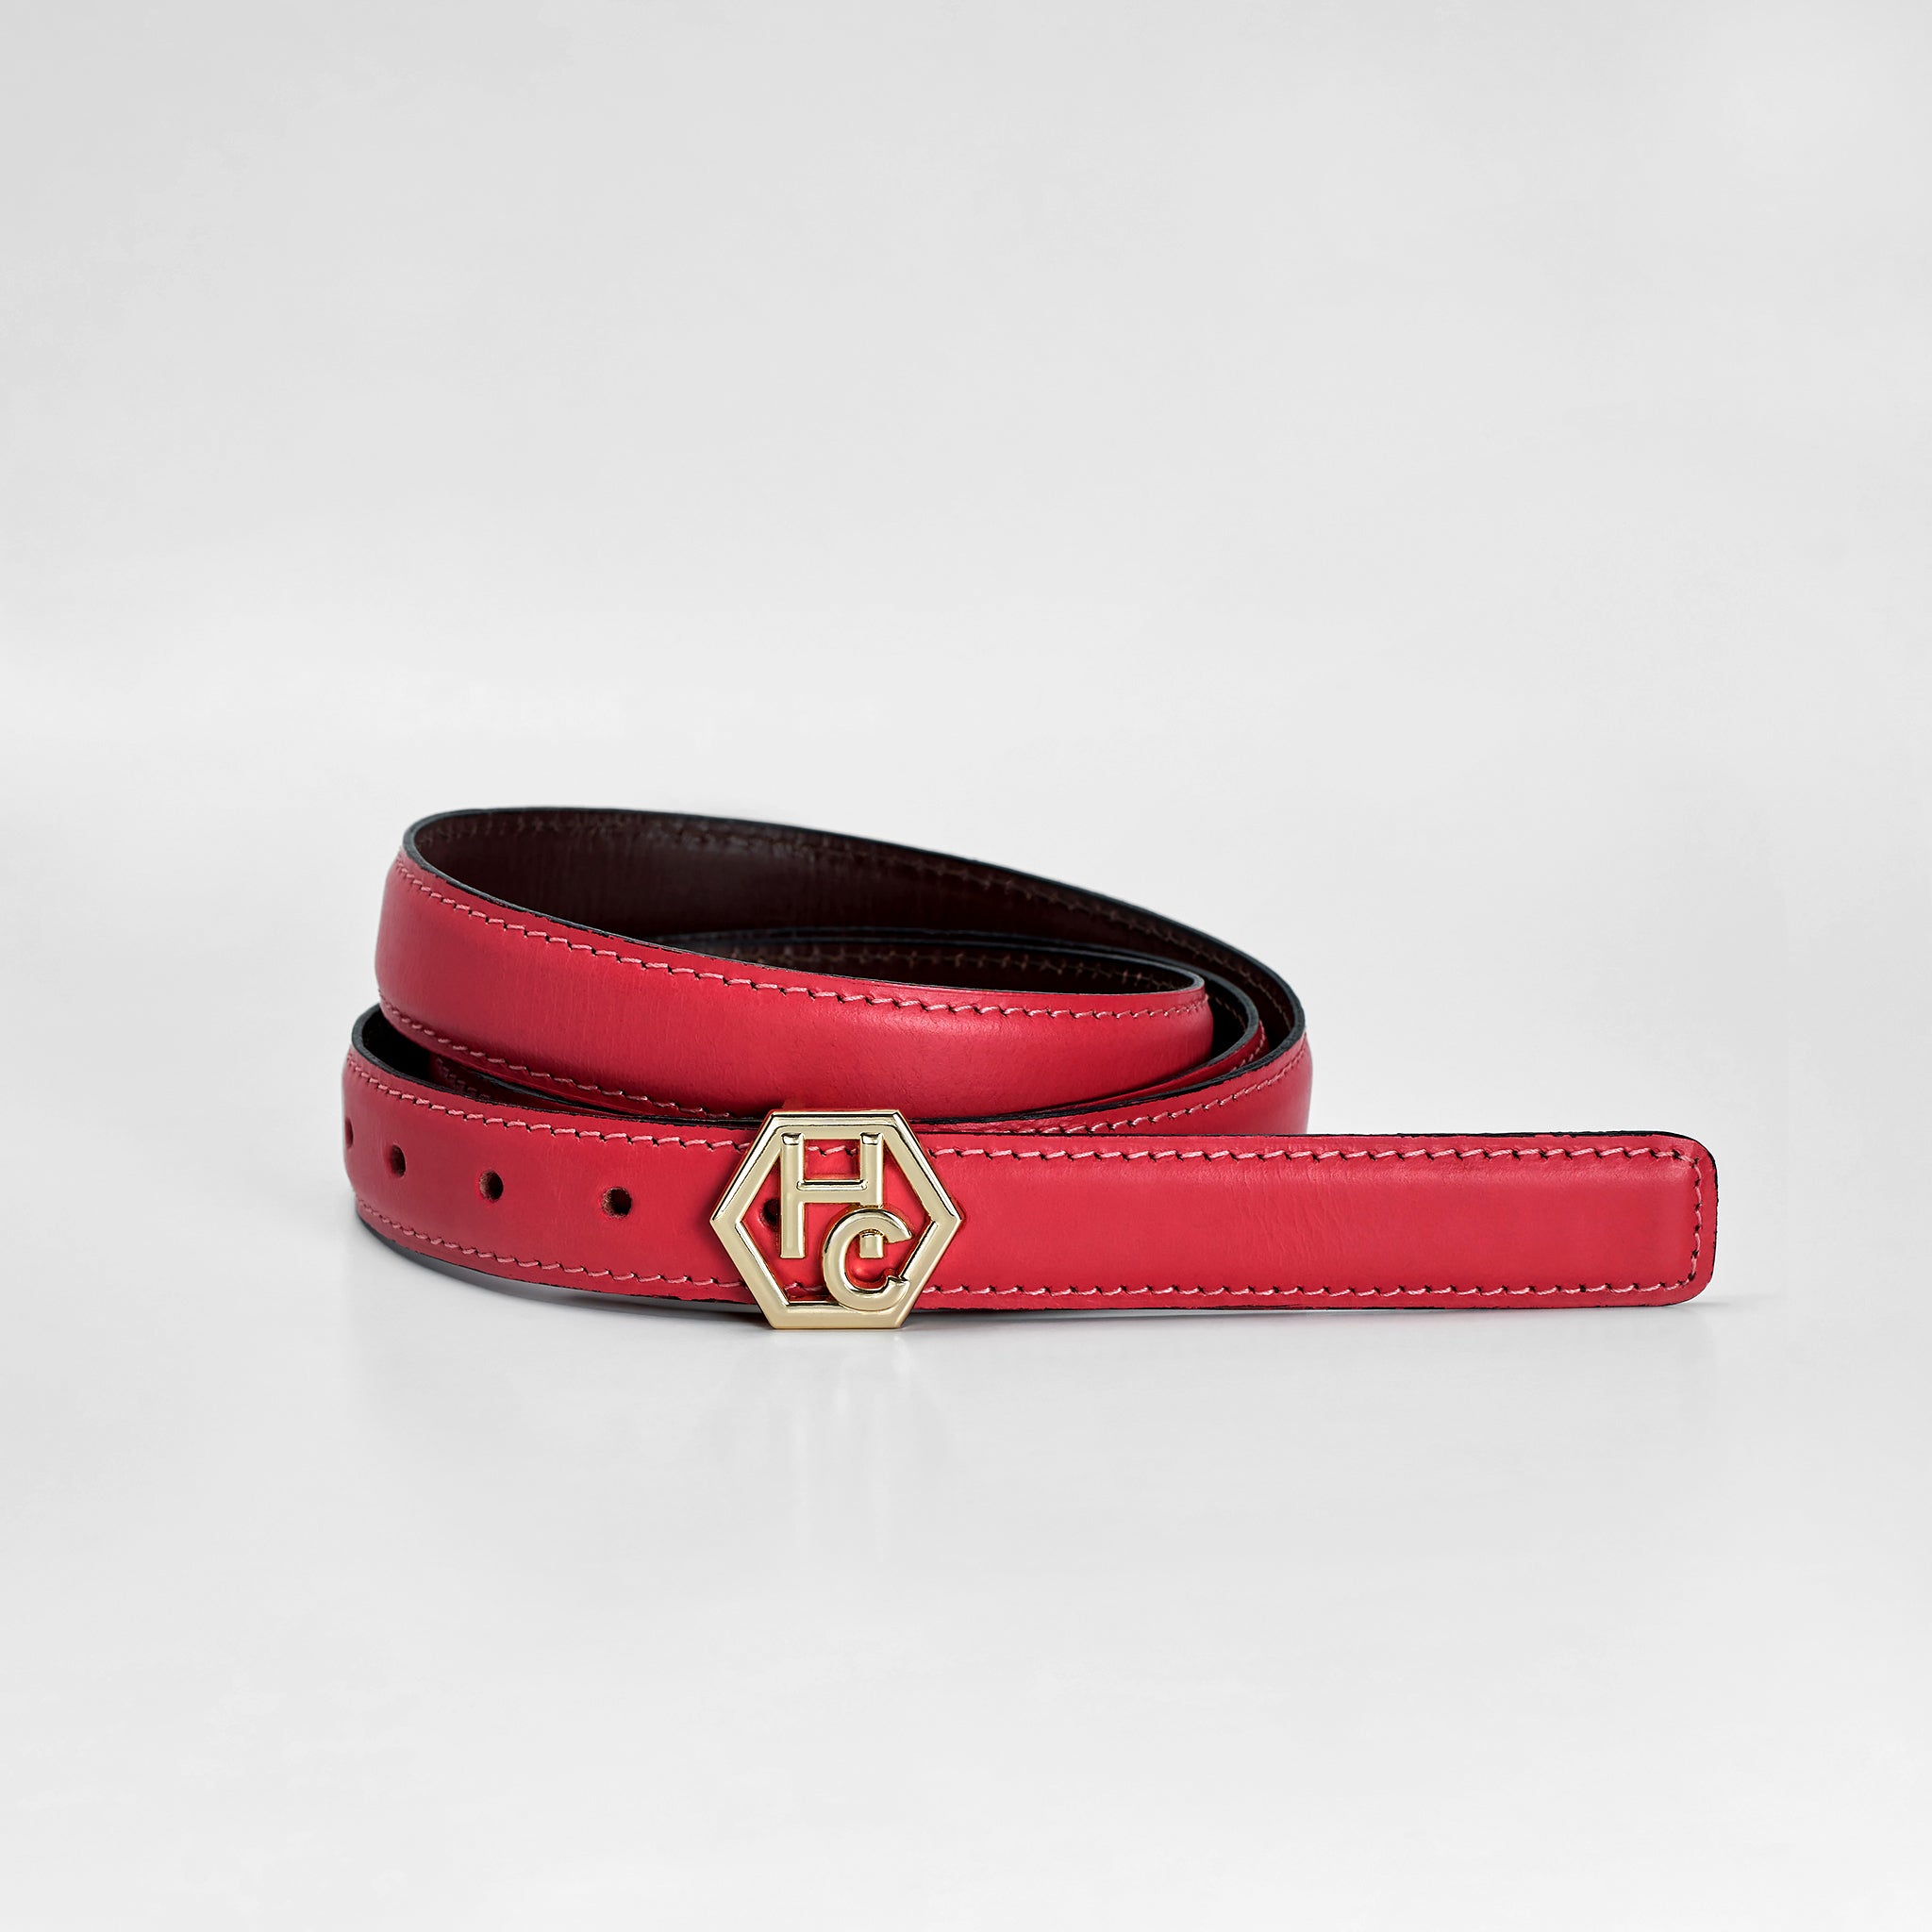 Hedonist Chicago Reversible Pink Red Leather Belt 1" 32381316300951